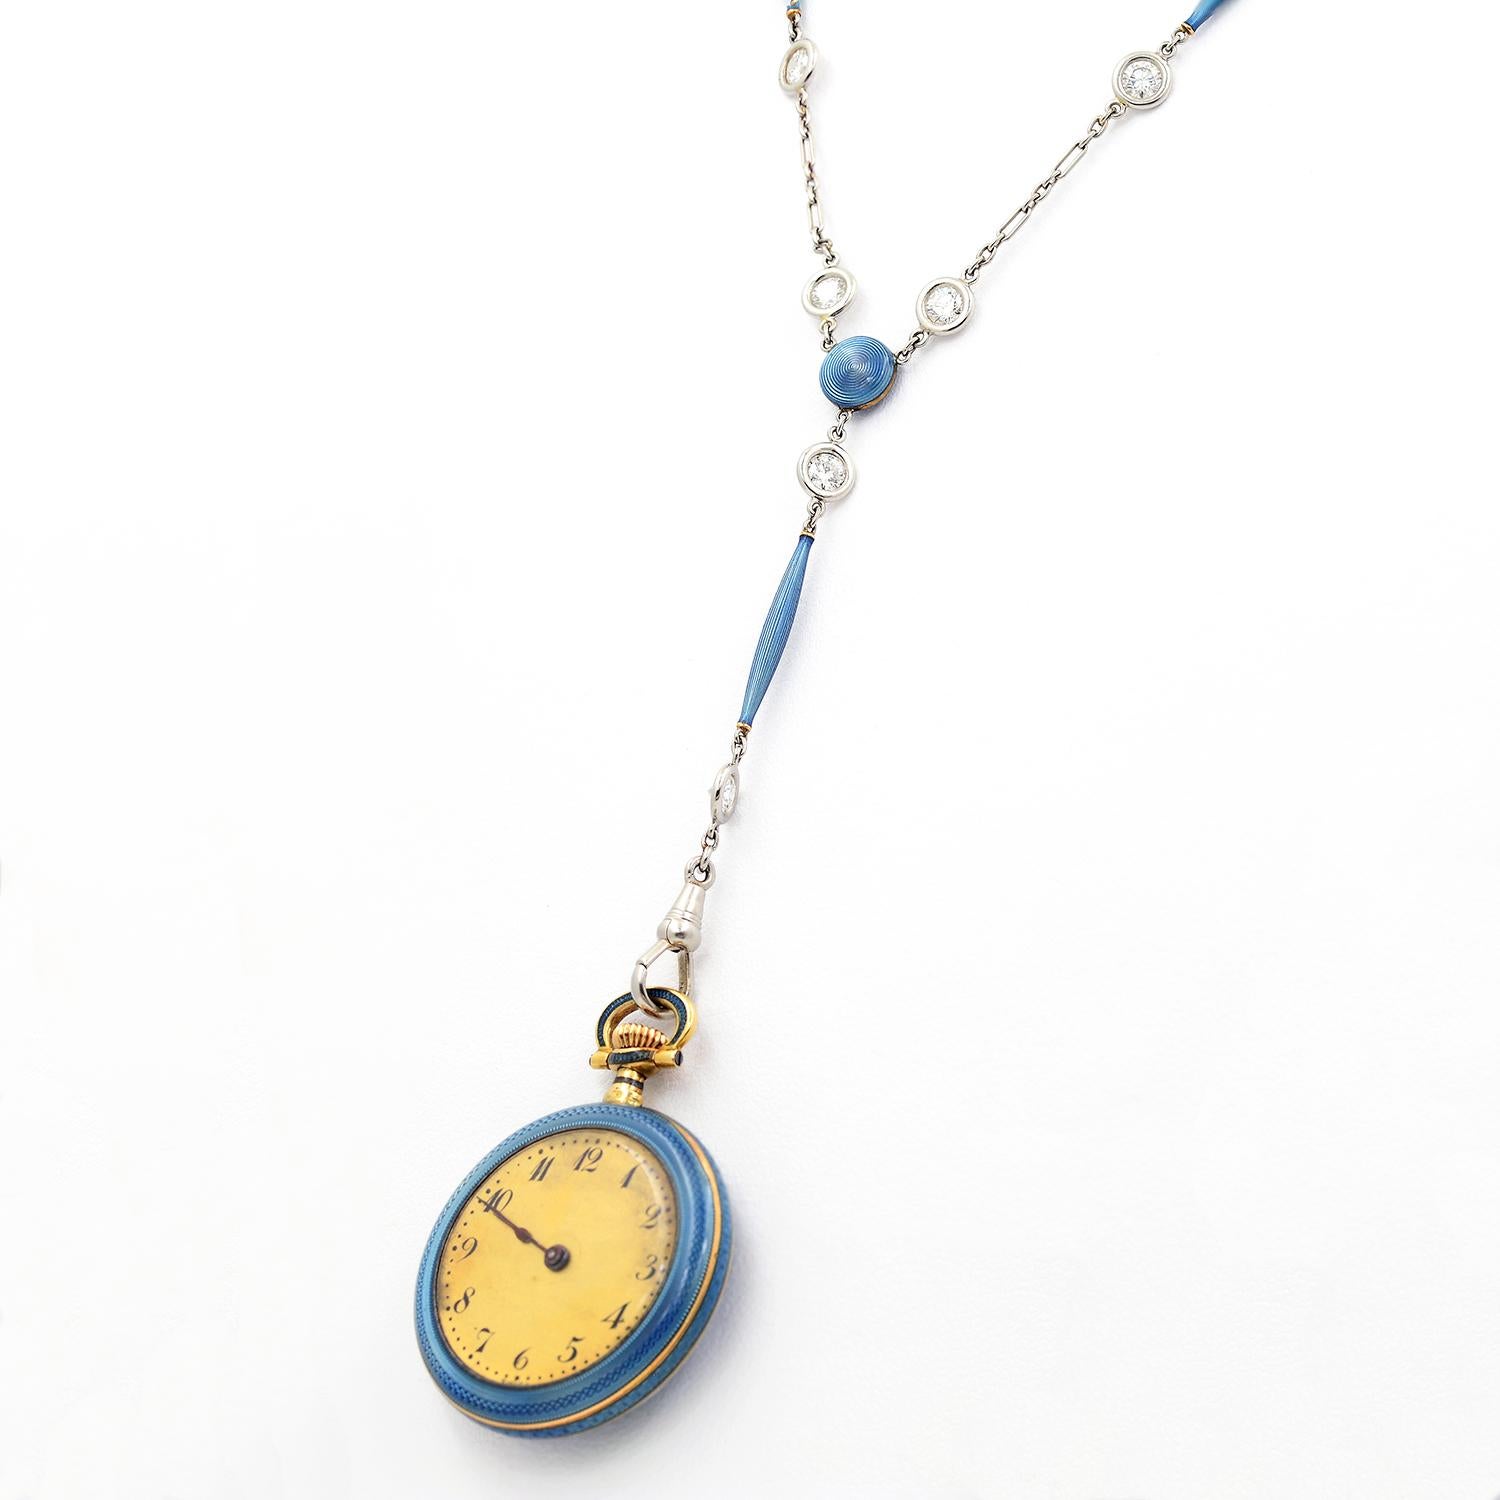 14k Yellow Gold & Blue Enamel Edwardian Pendant Watch Necklace In Good Condition For Sale In Dallas, TX